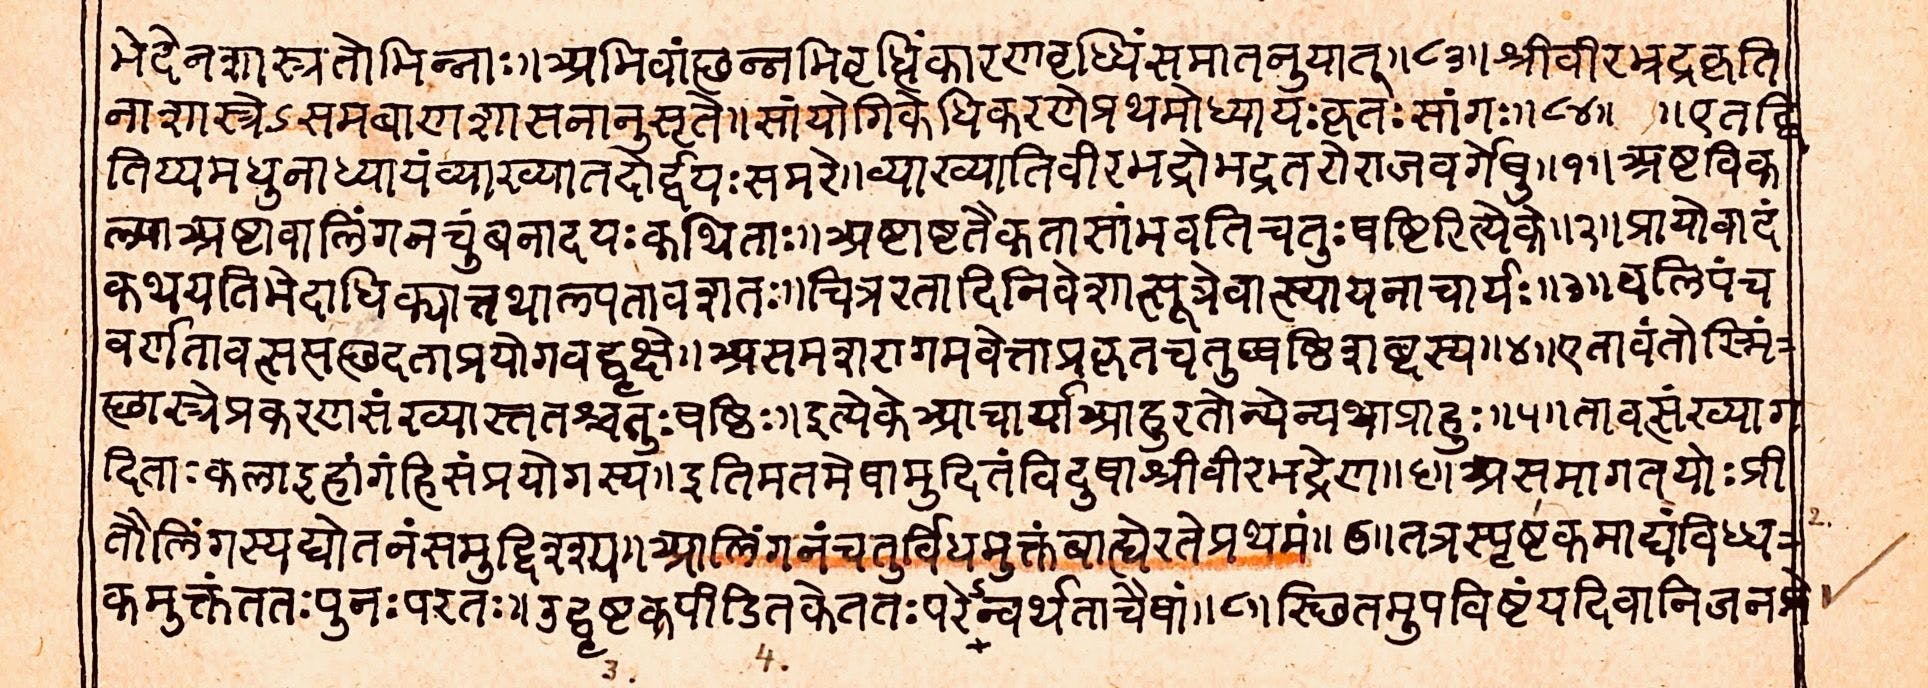 A Kamasutra manuscript page preserved in the vaults of the Raghunatha Hindu temple in Jammu &amp; Kashmir 